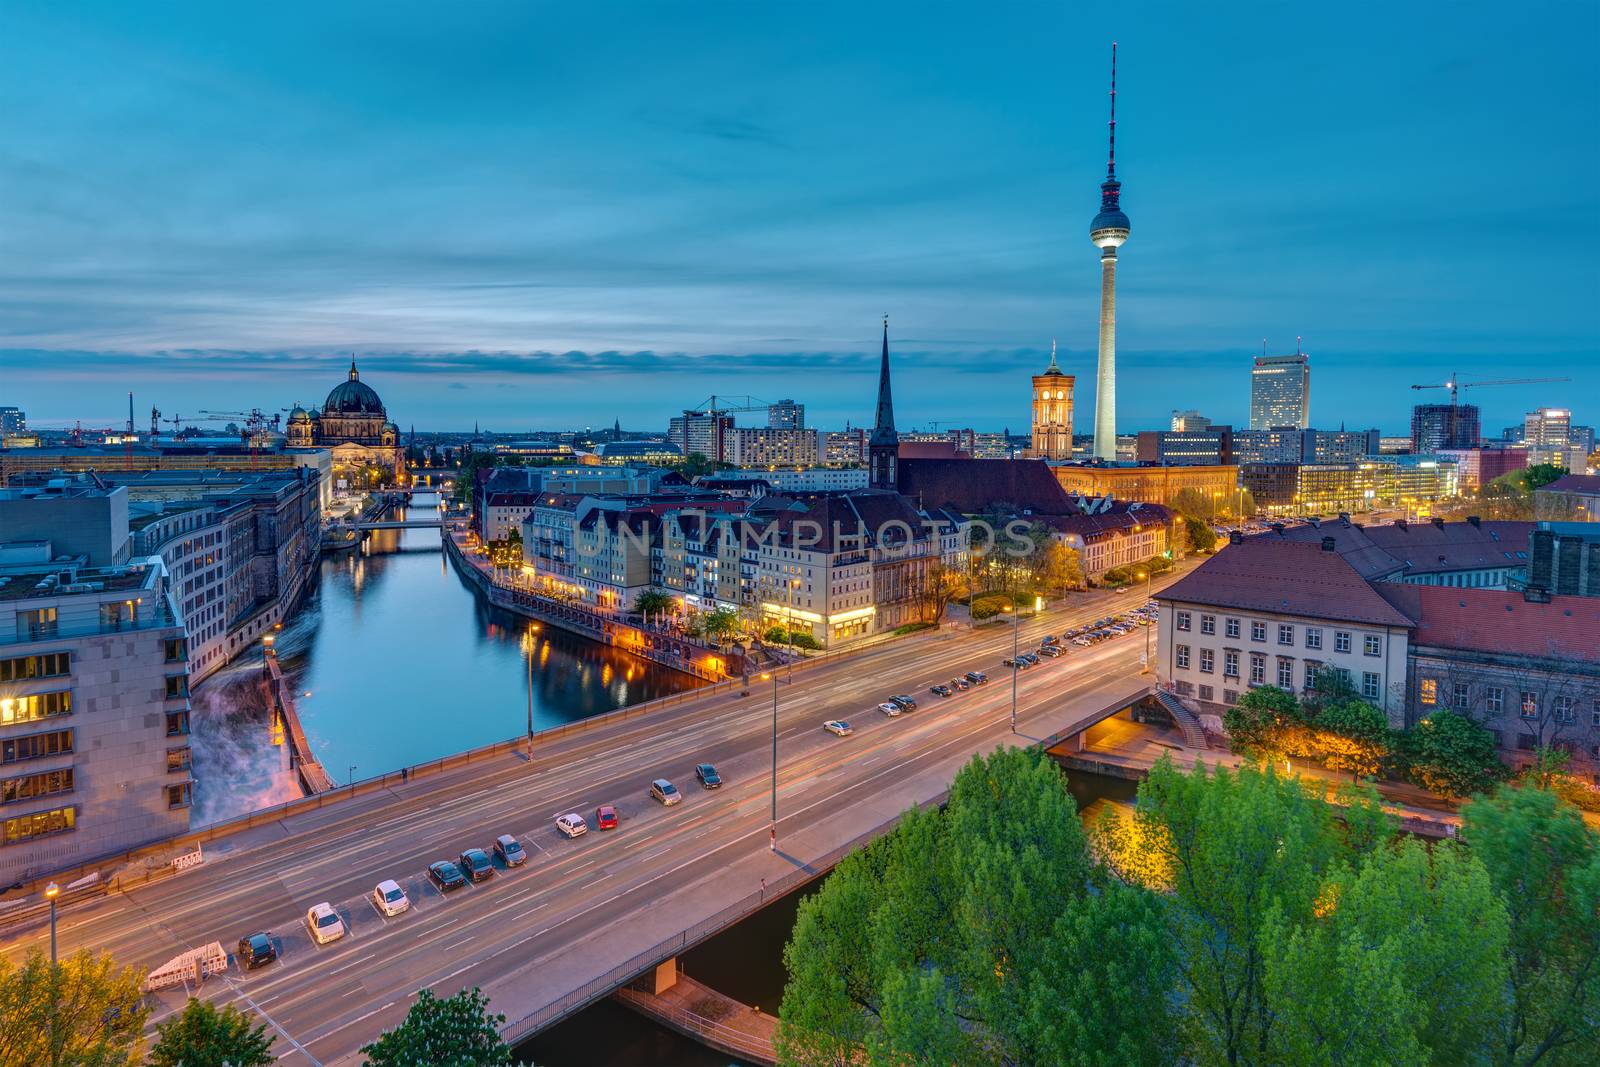 The center of Berlin with the famous television tower at dusk